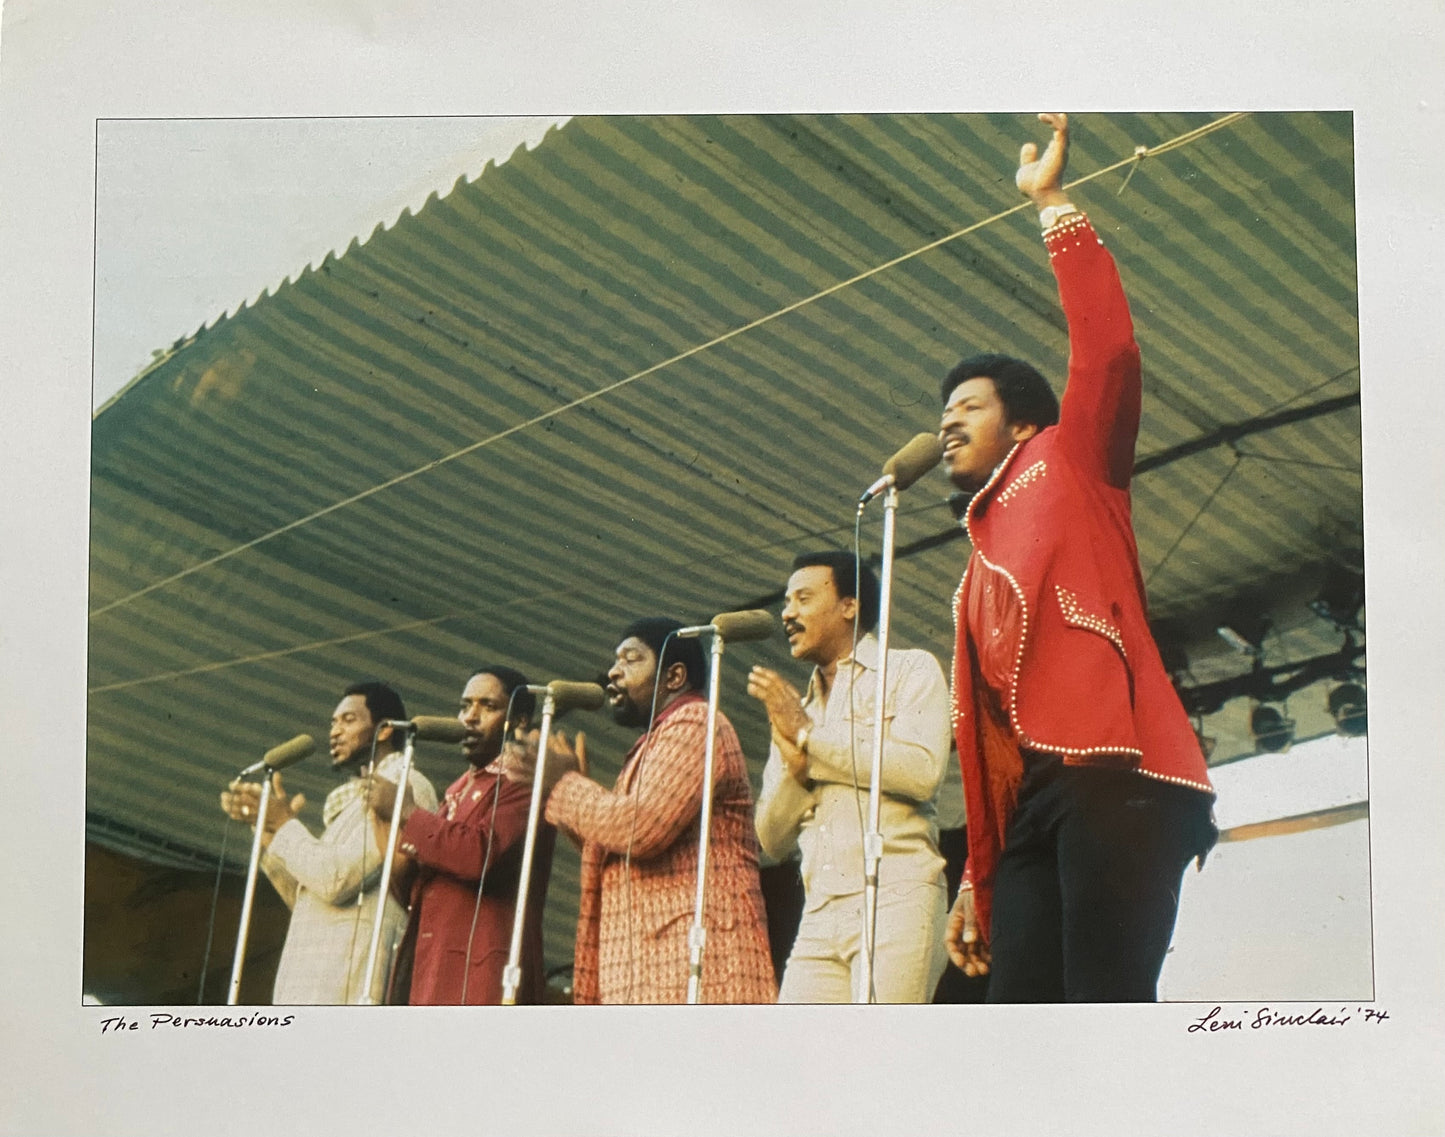 The Persuasions Photo by Leni Sinclair